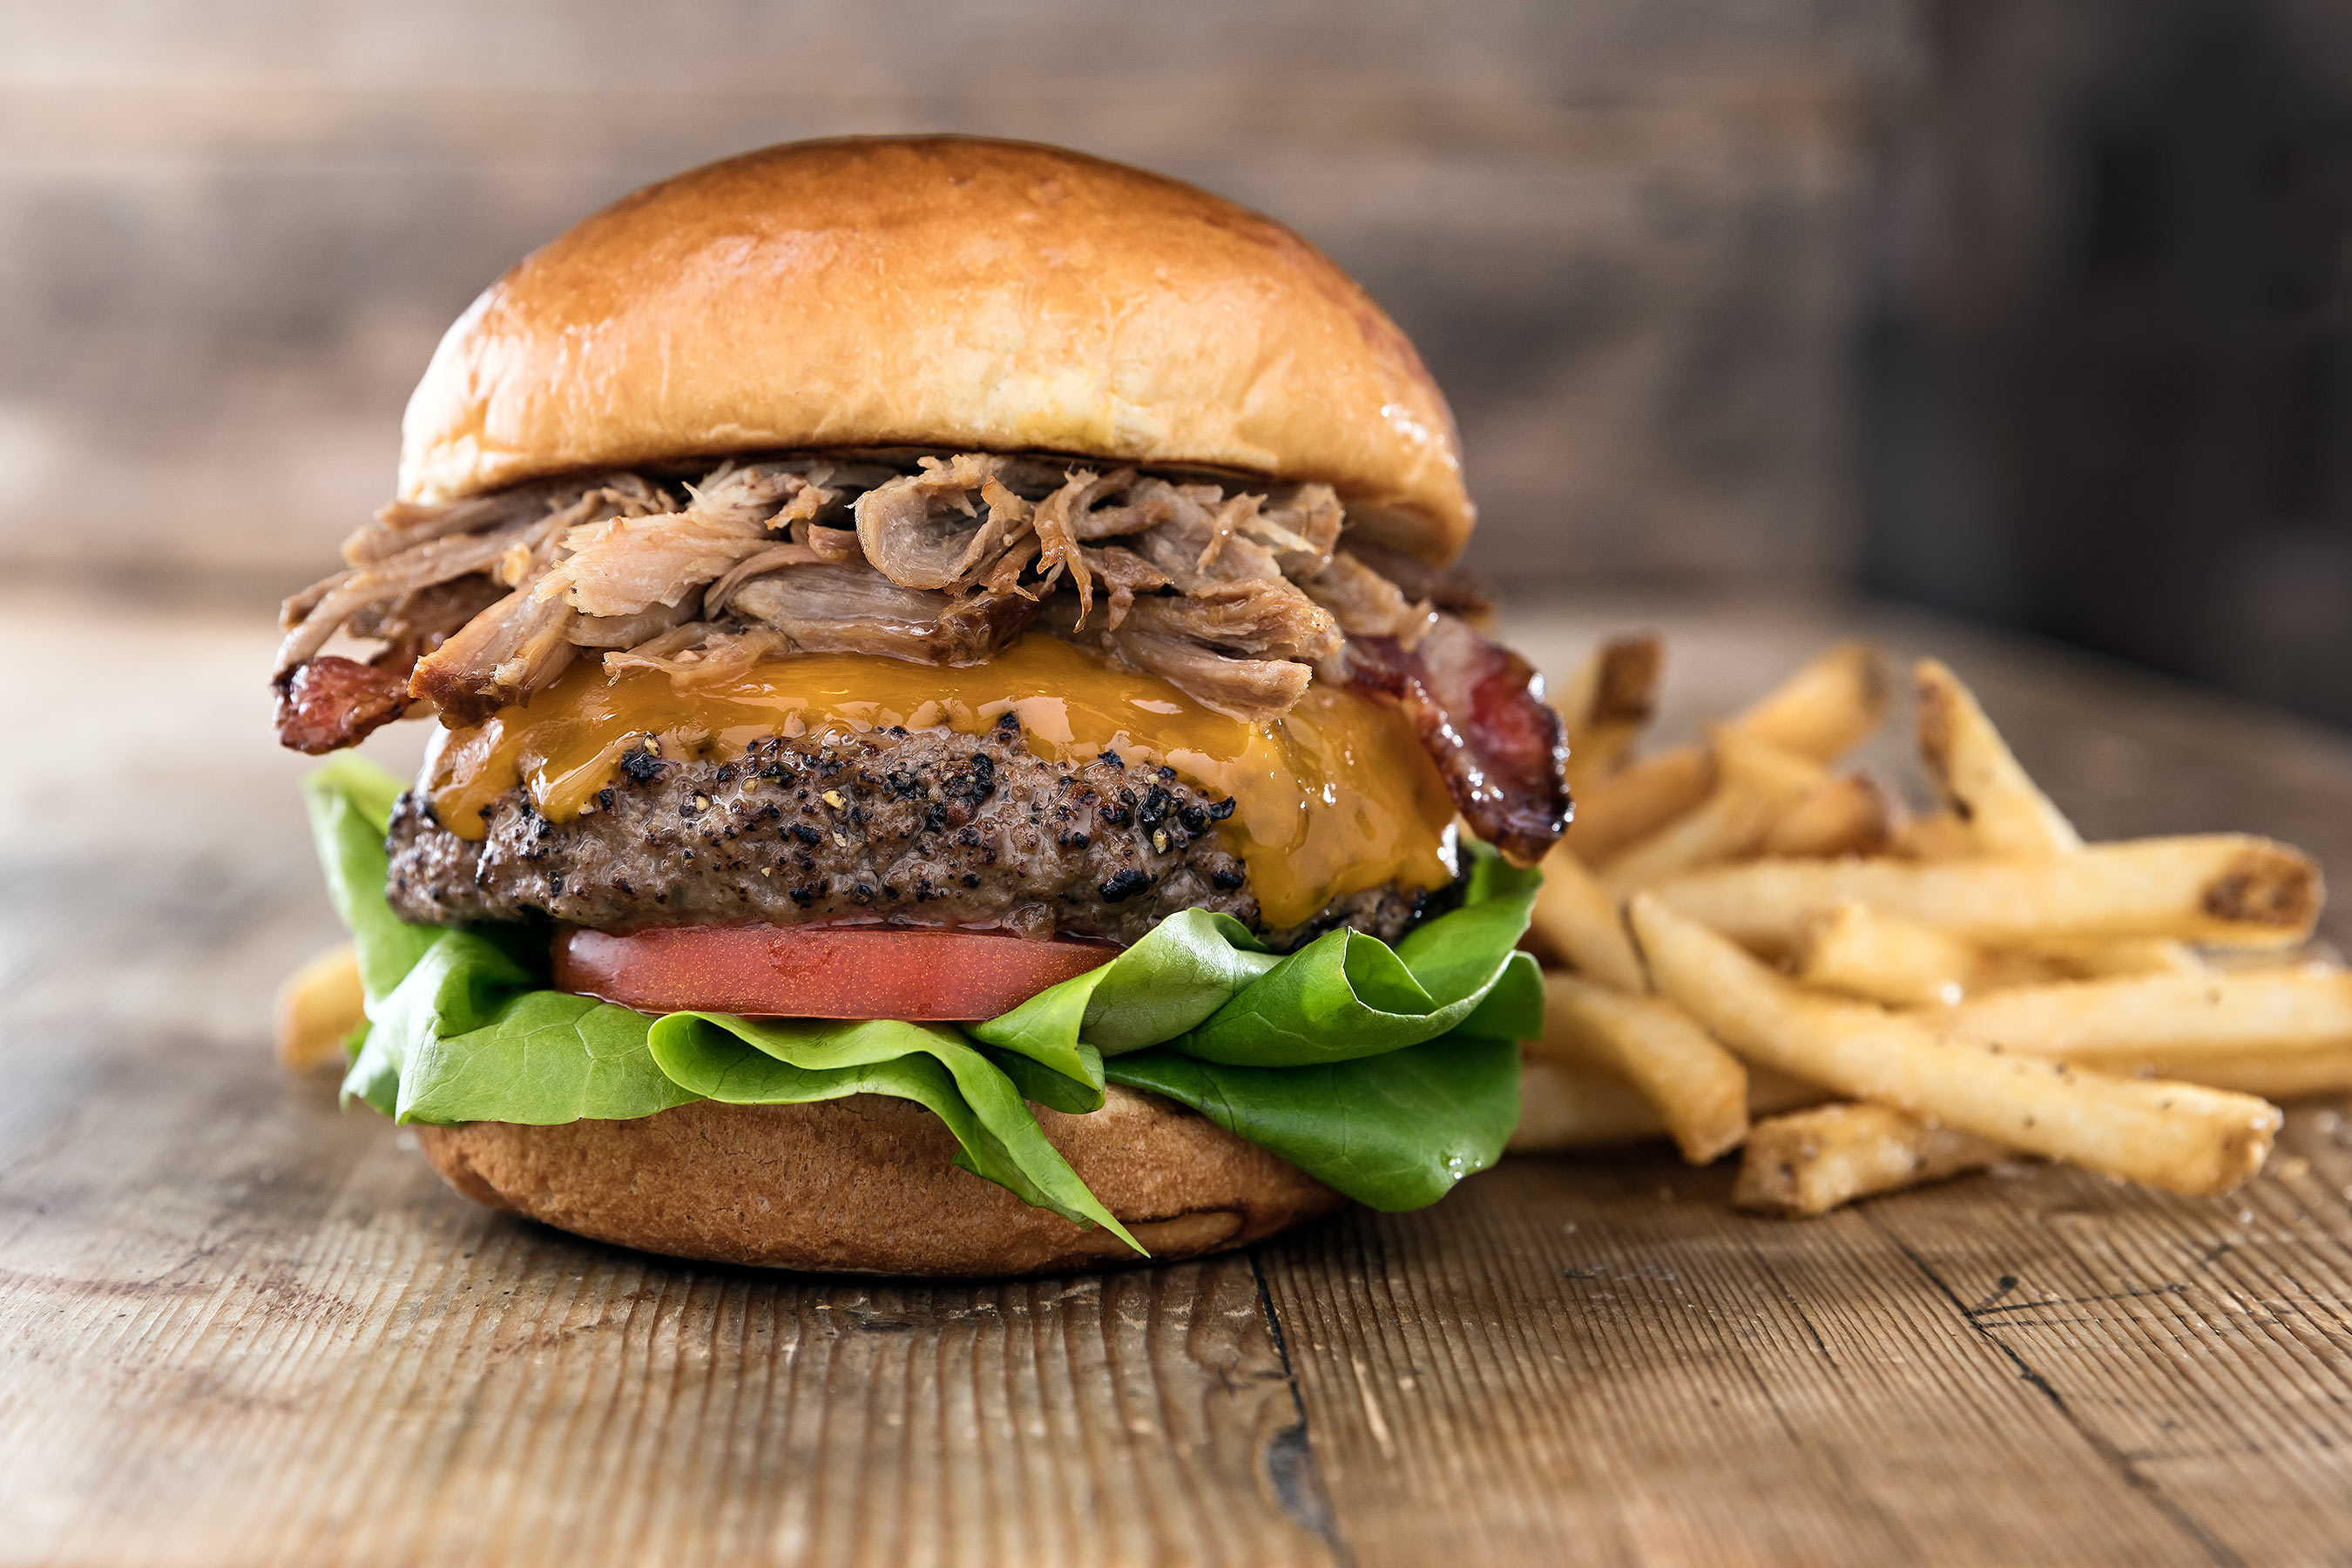 BBQ CHIPOTLE BURGER with pulled pork, cheddar, bacon, lettuce & tomato